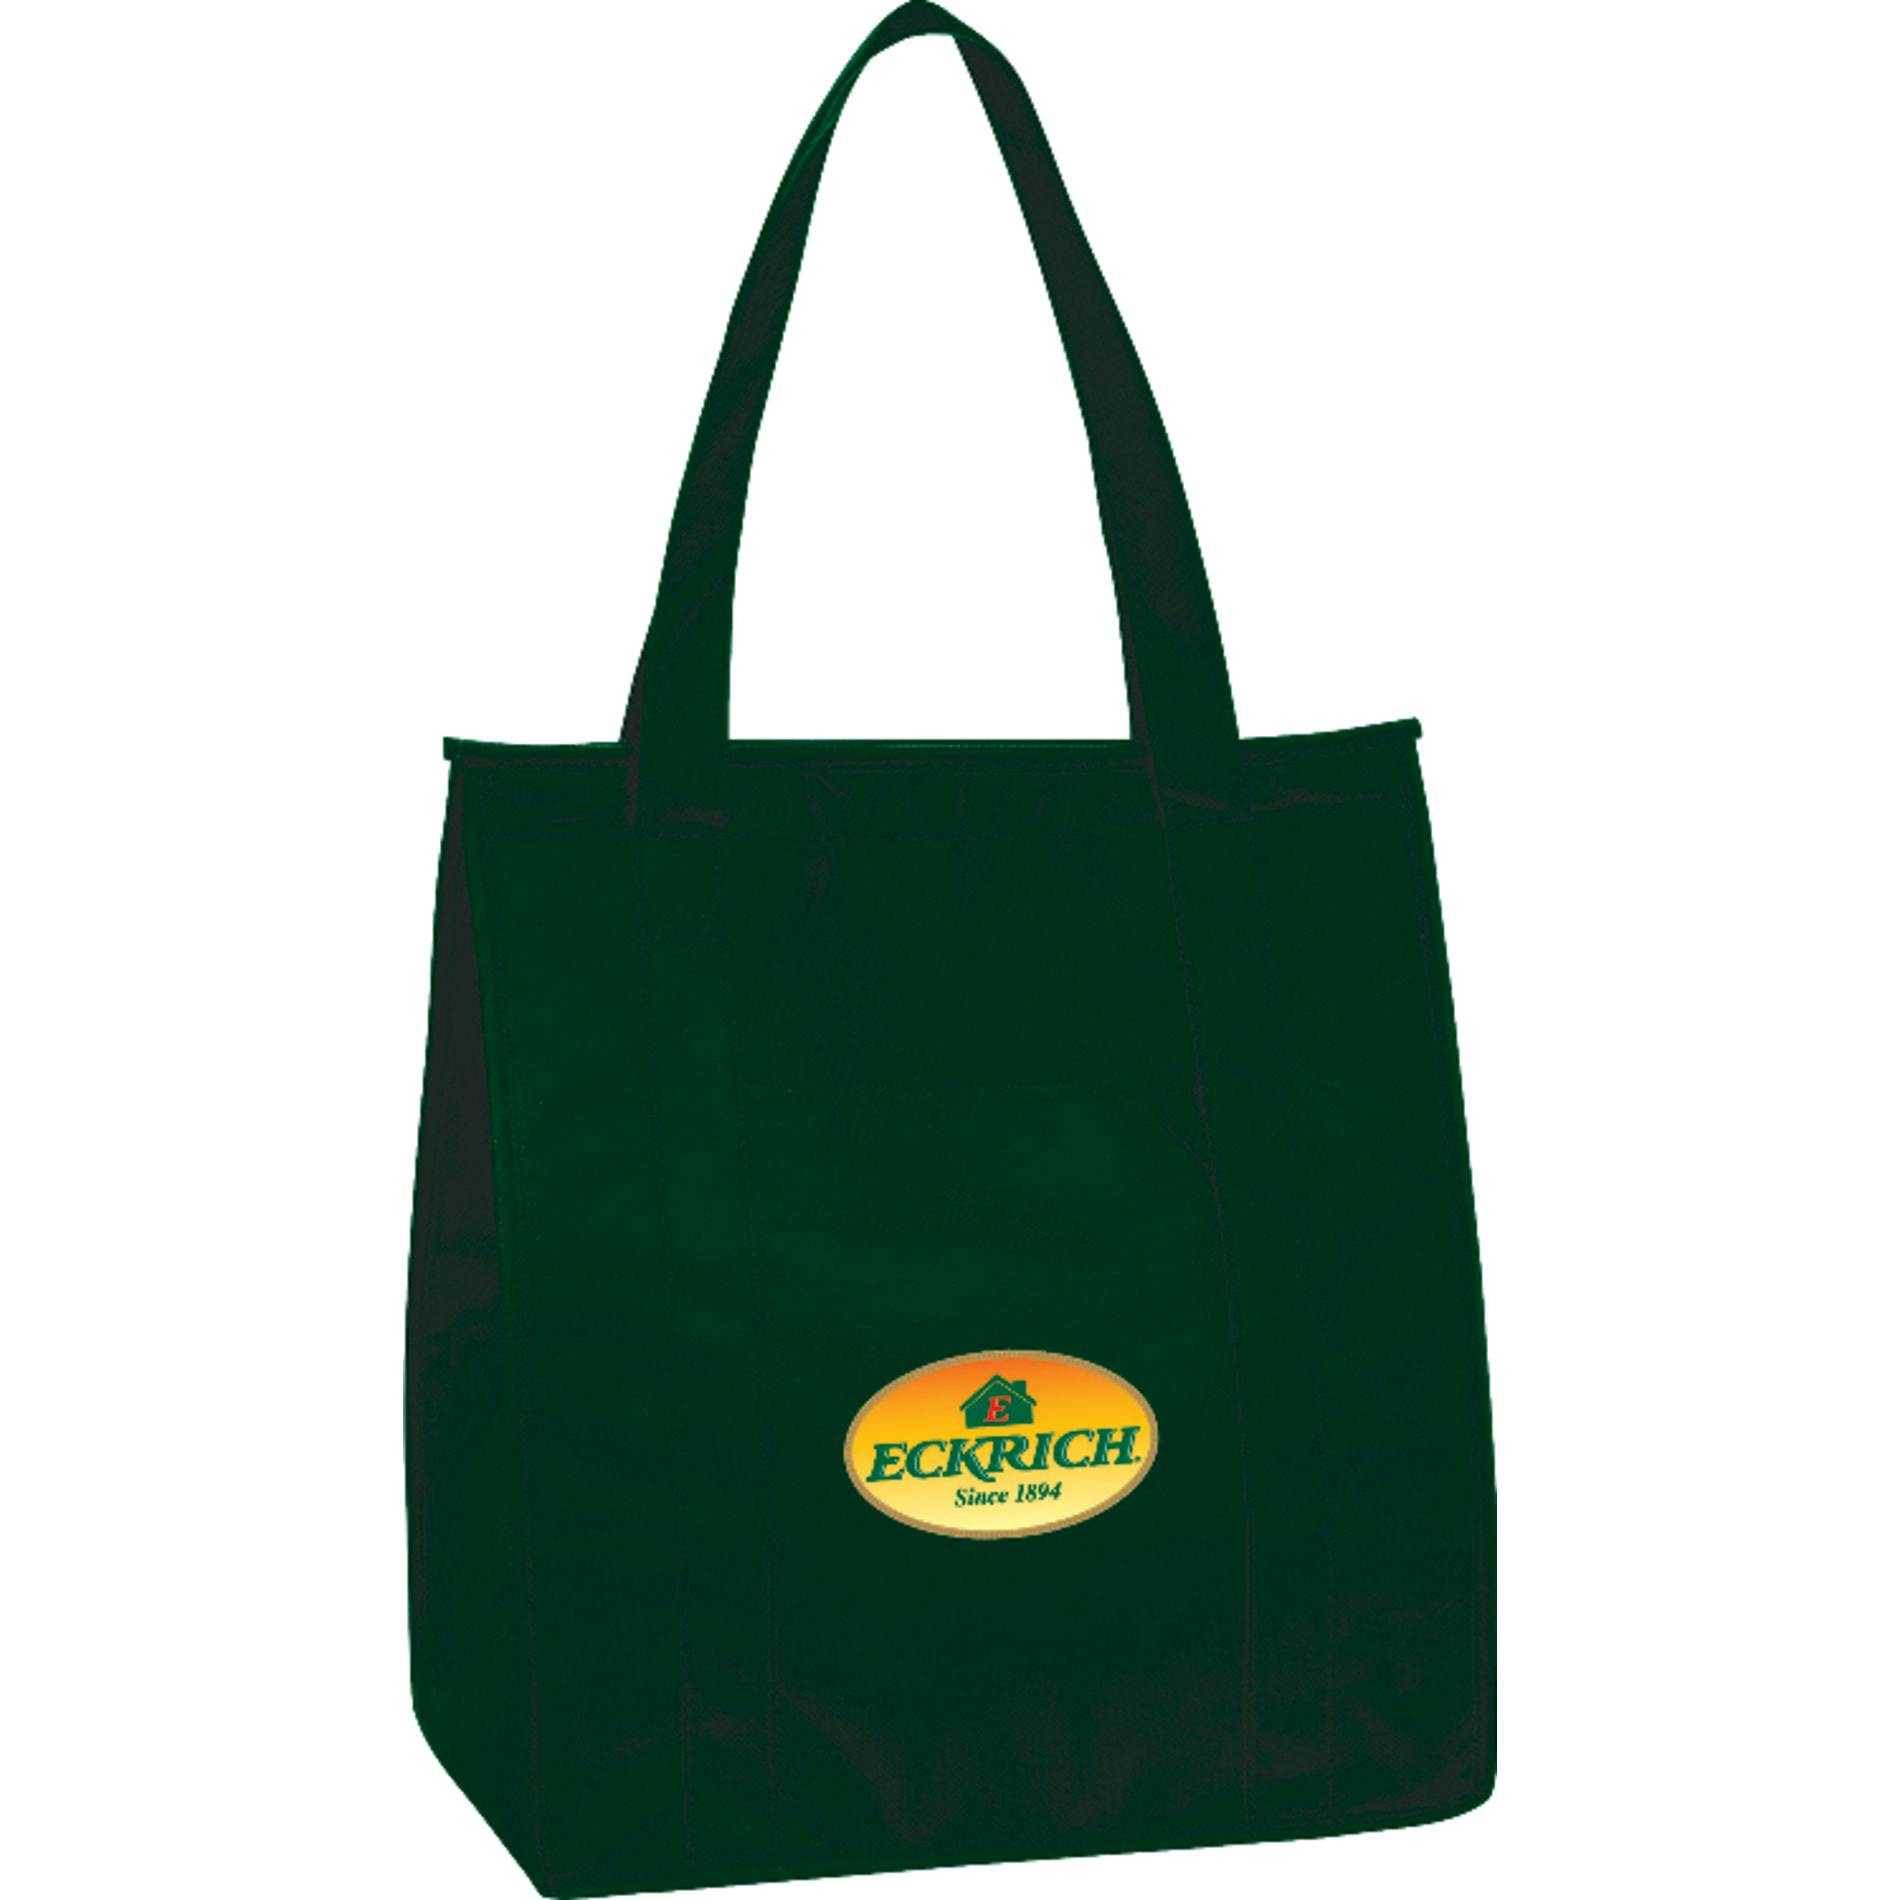 Hercules Insulated Grocery Tote - additional Image 1